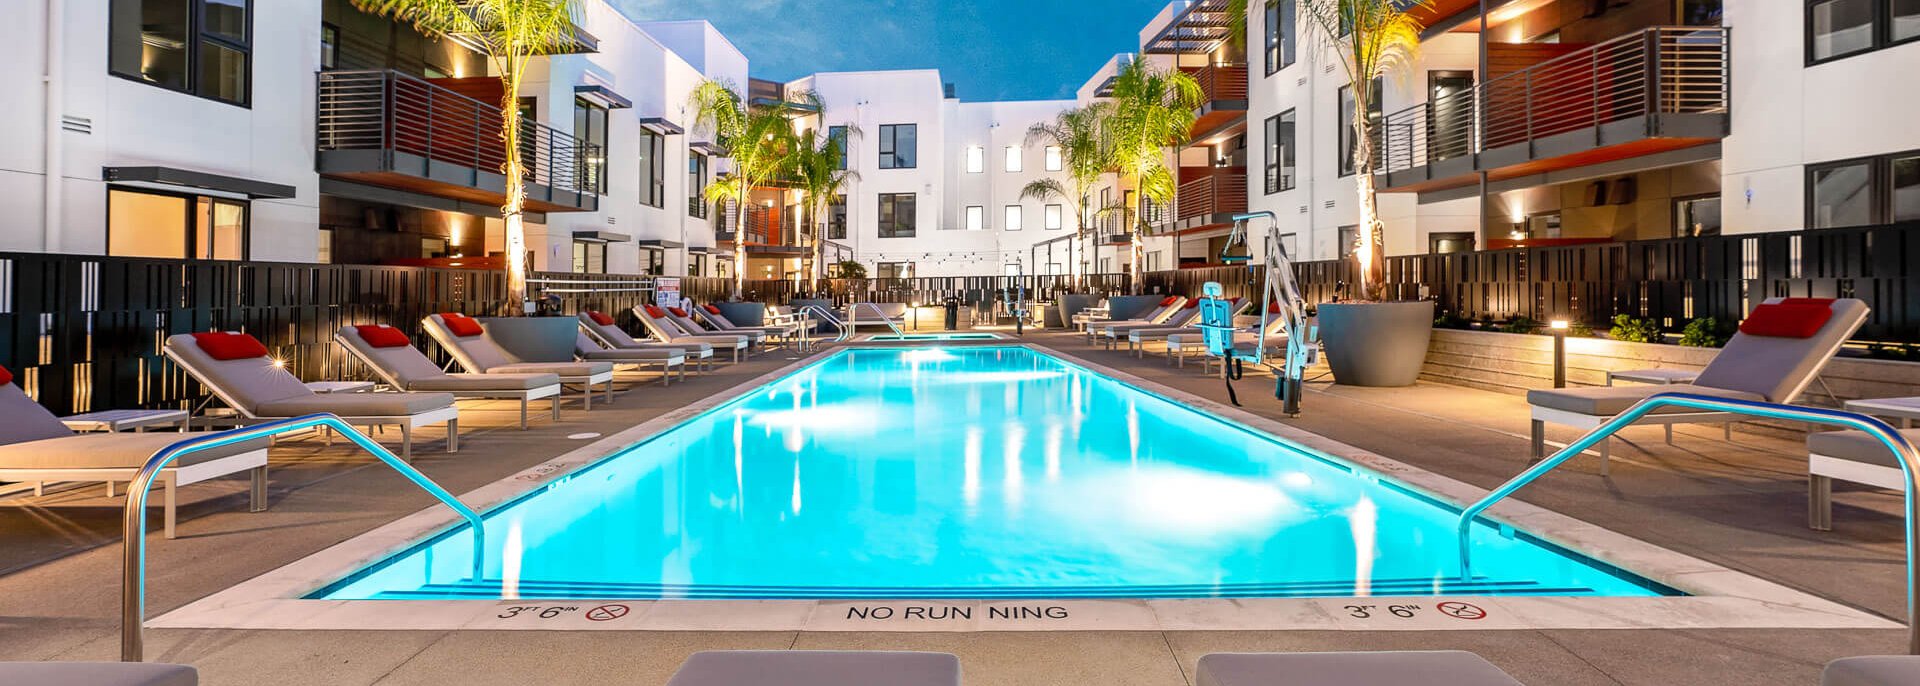 Legacy at Hayward's outdoor pool area, surrounded by lush palm trees and enclosed by the surrounding buildings.